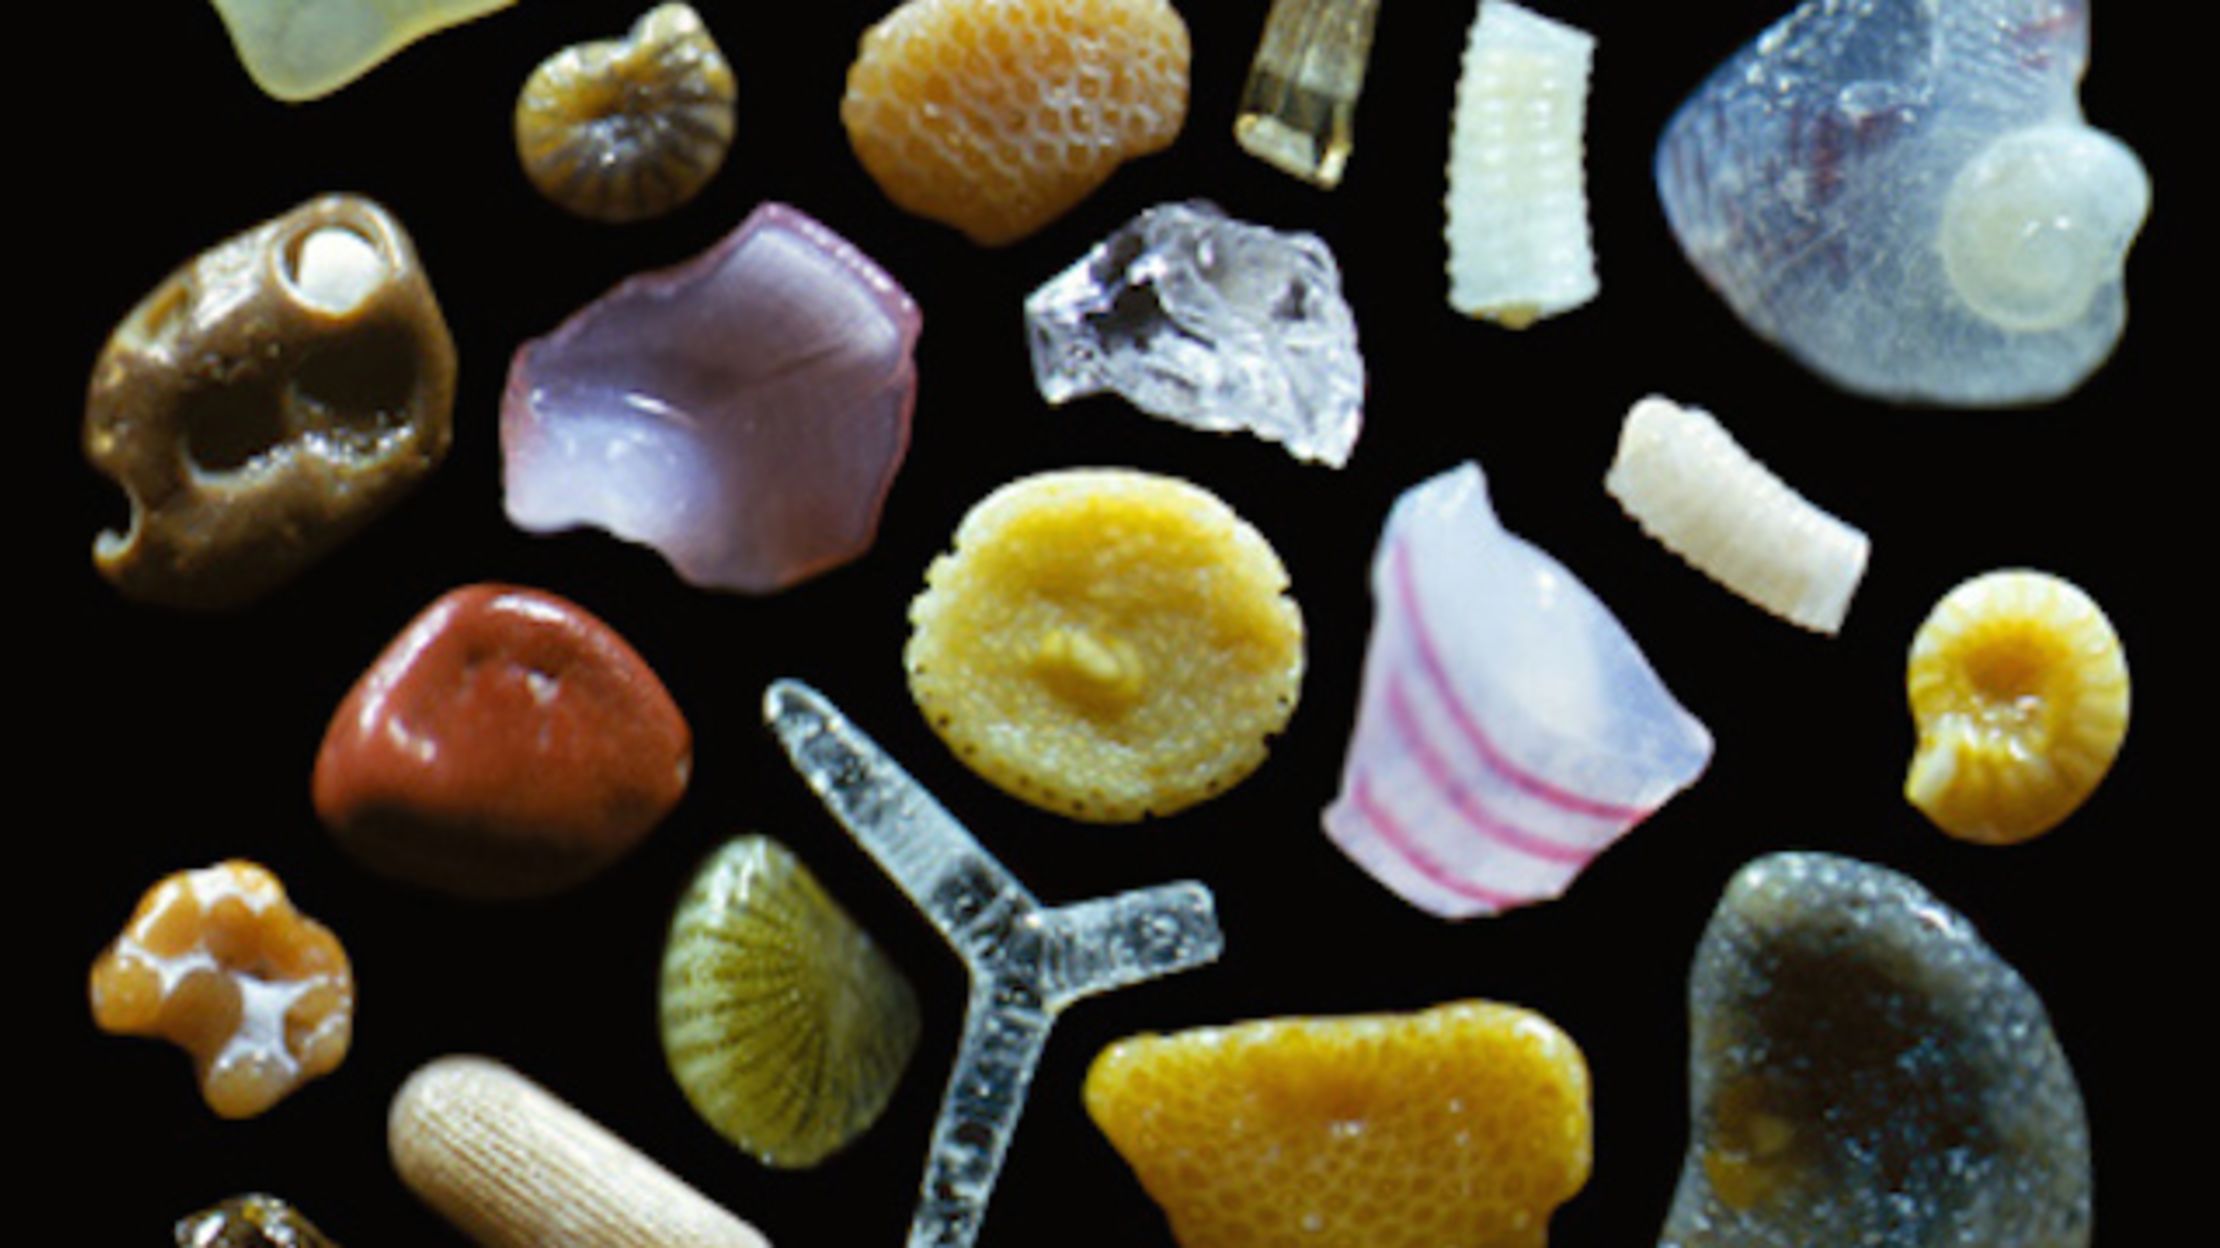 Super Magnified Grains Of Sand Become Dramatic Works Of Art Mental Floss